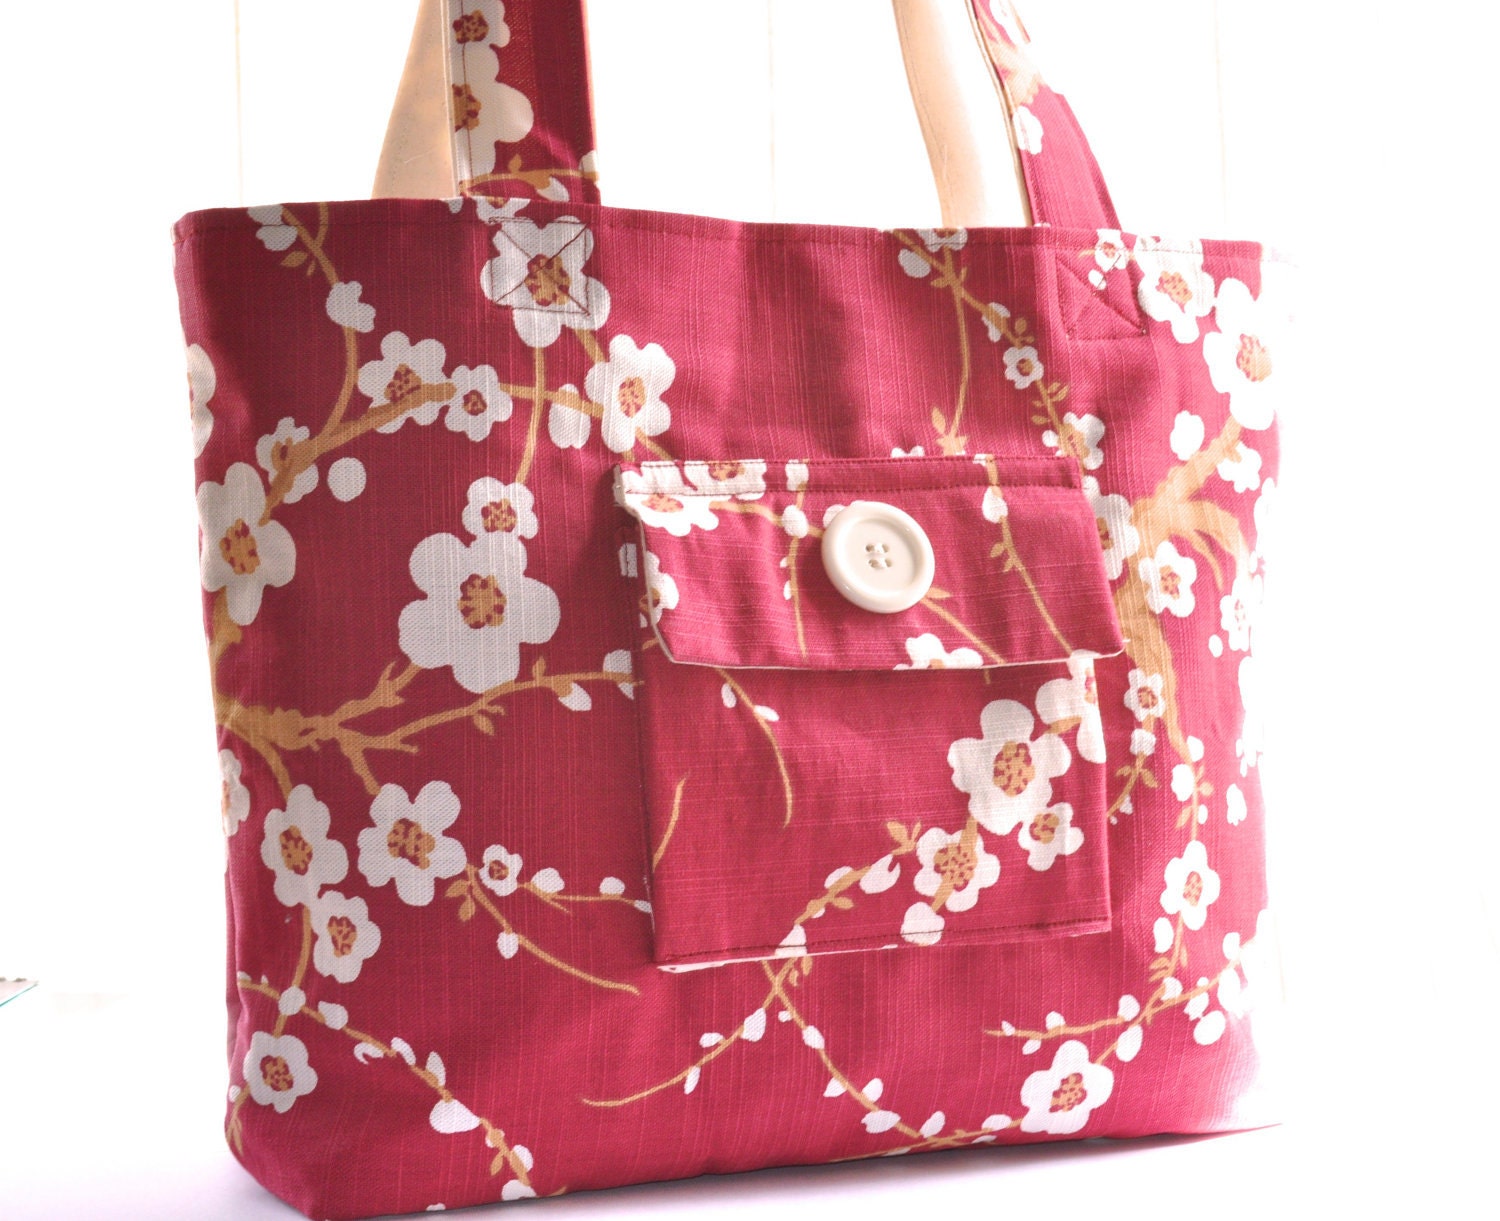 Laura Ashley tote bag purse cherry blossom floral by CraftStall